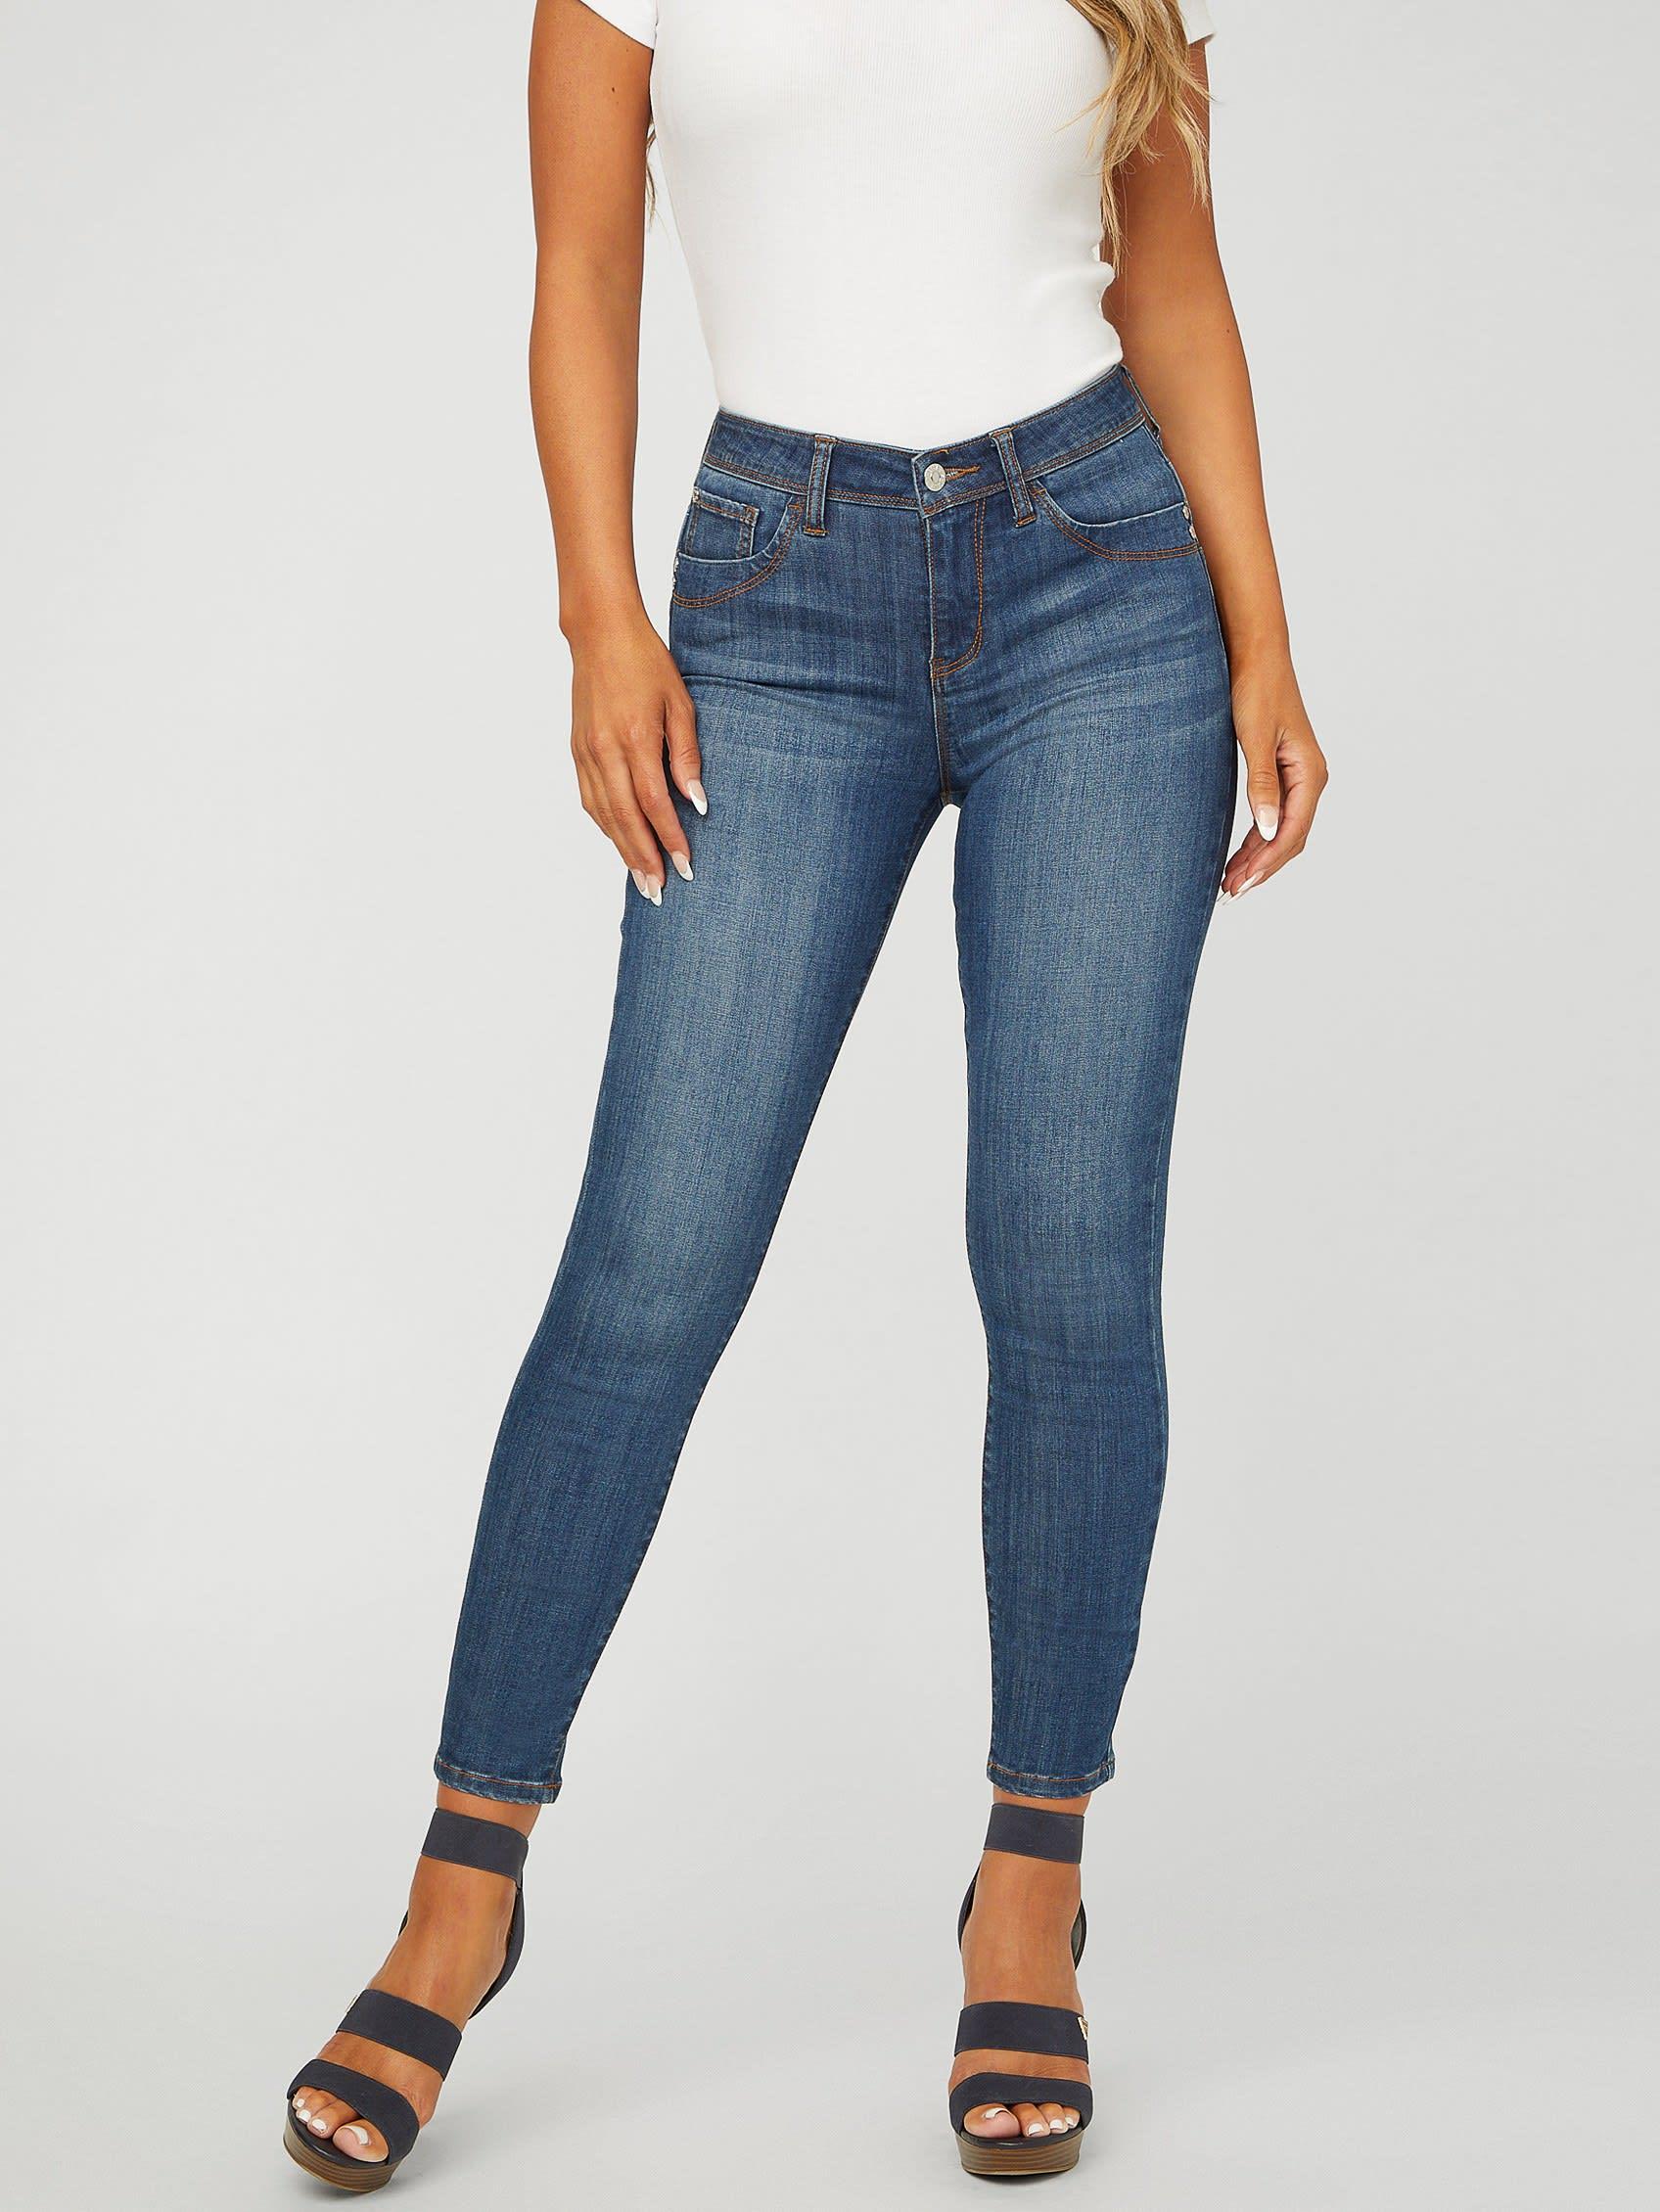 Guess Factory Curvy Mid-rise Jeans in Blue | Lyst